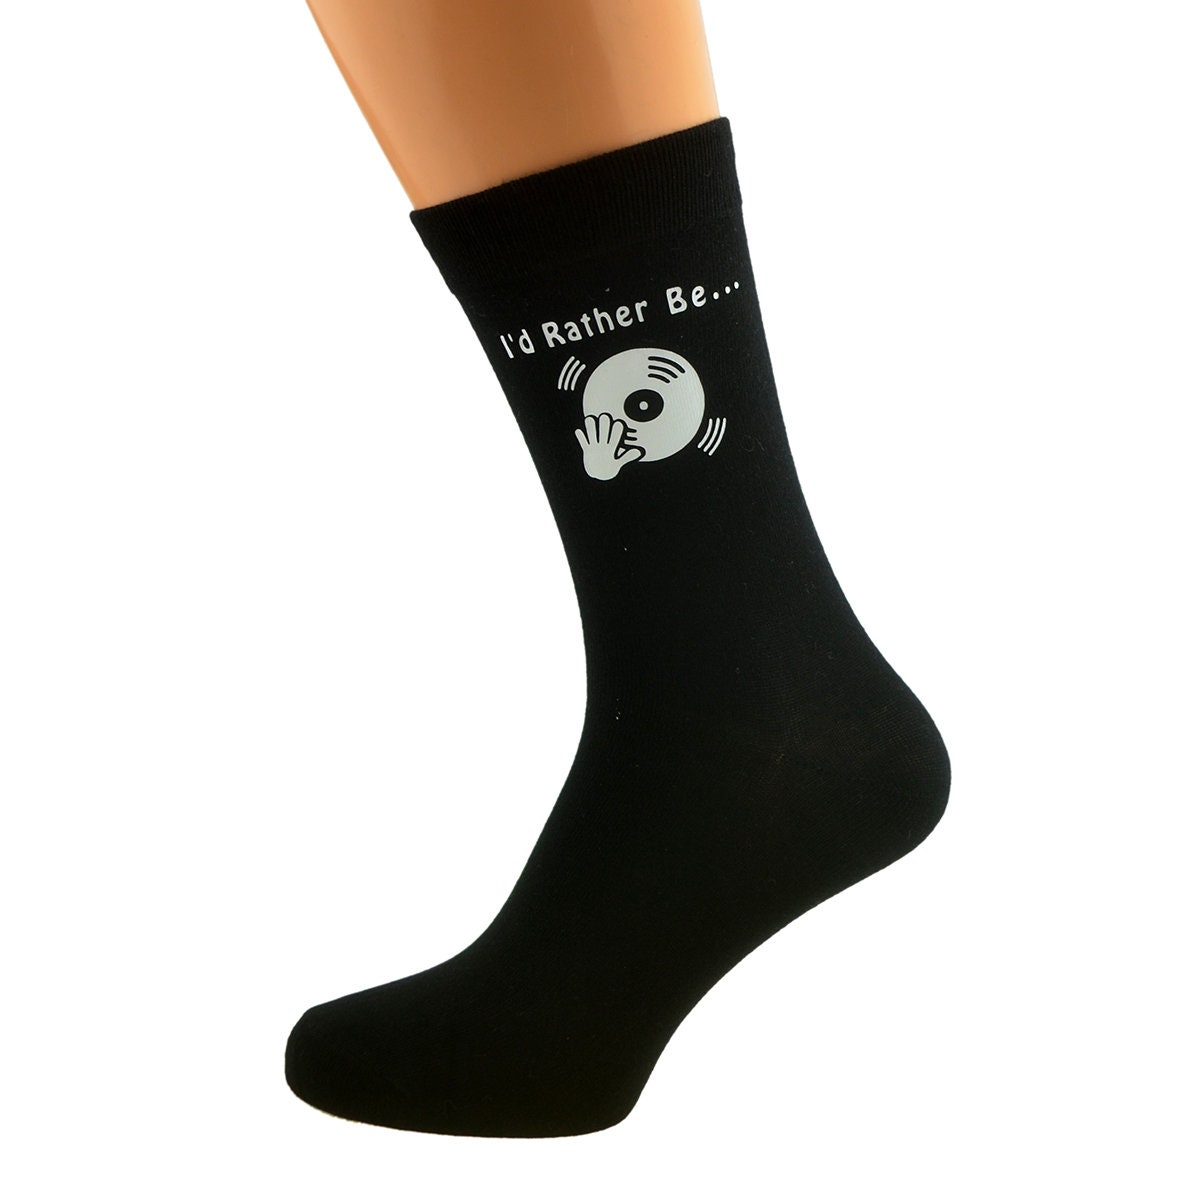 I’d Rather Be Dj With Playing Record Music Image Printed in White Vinyl On Mens Black Cotton Rich Socks Great. One Size, UK 8-12